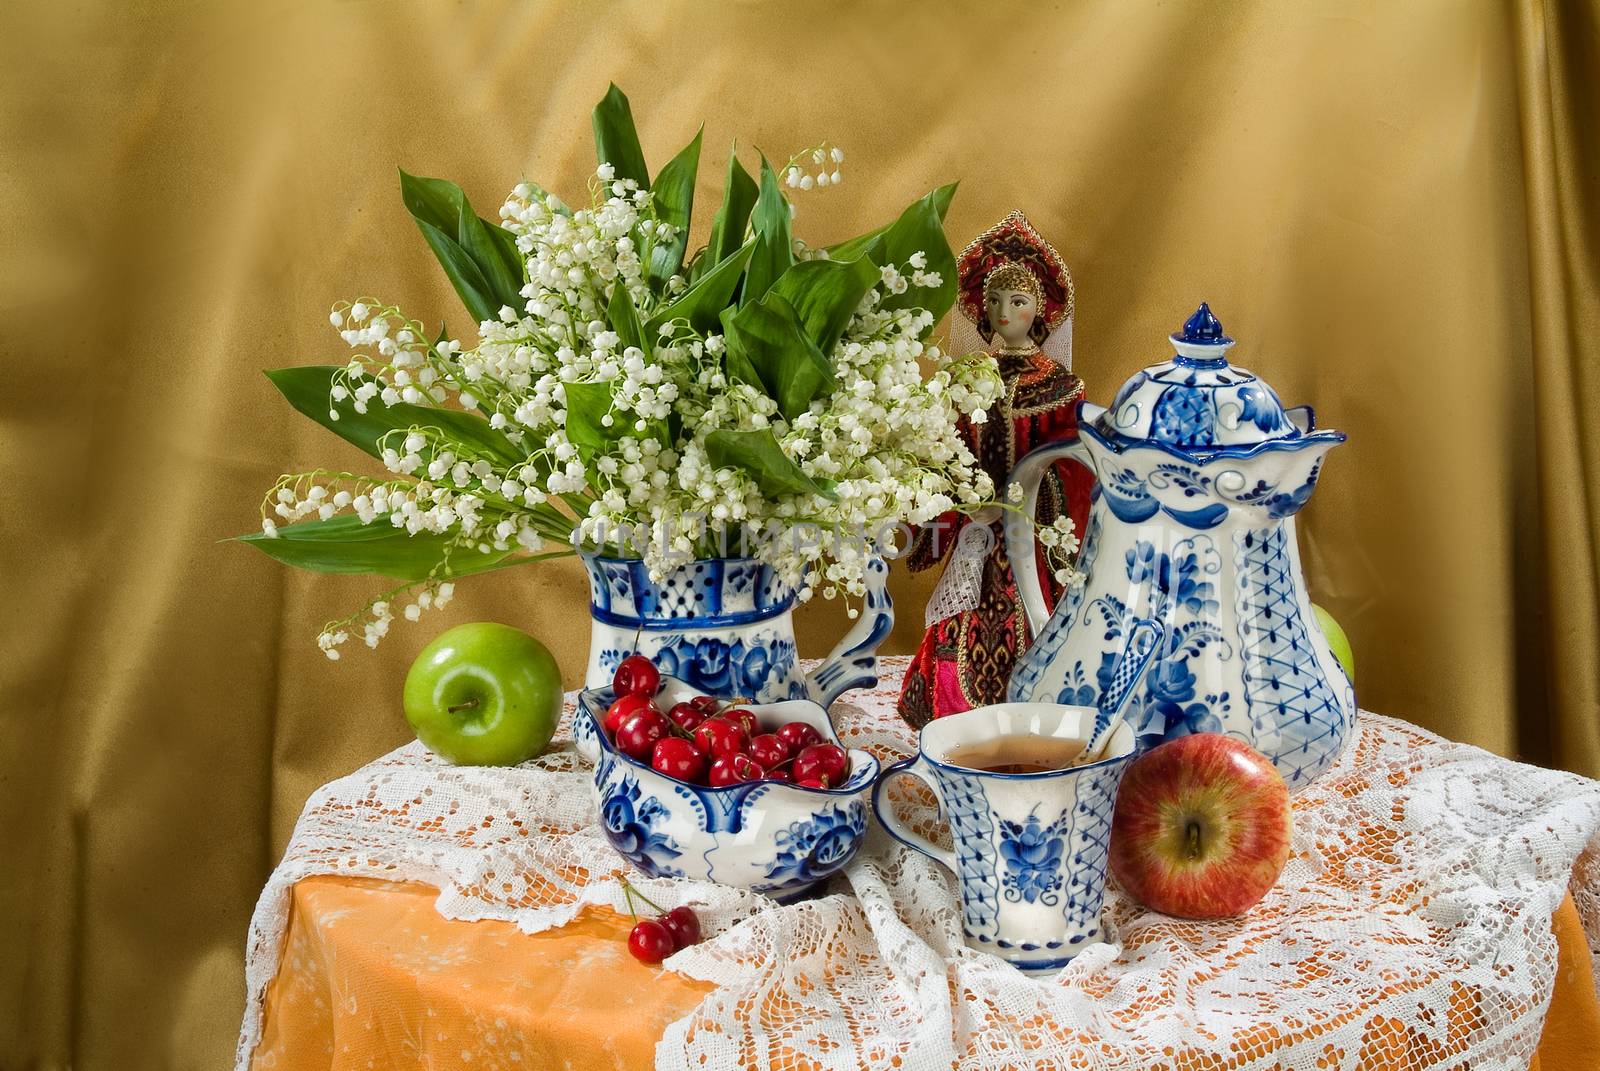 Still life in Russian national style on canvas background